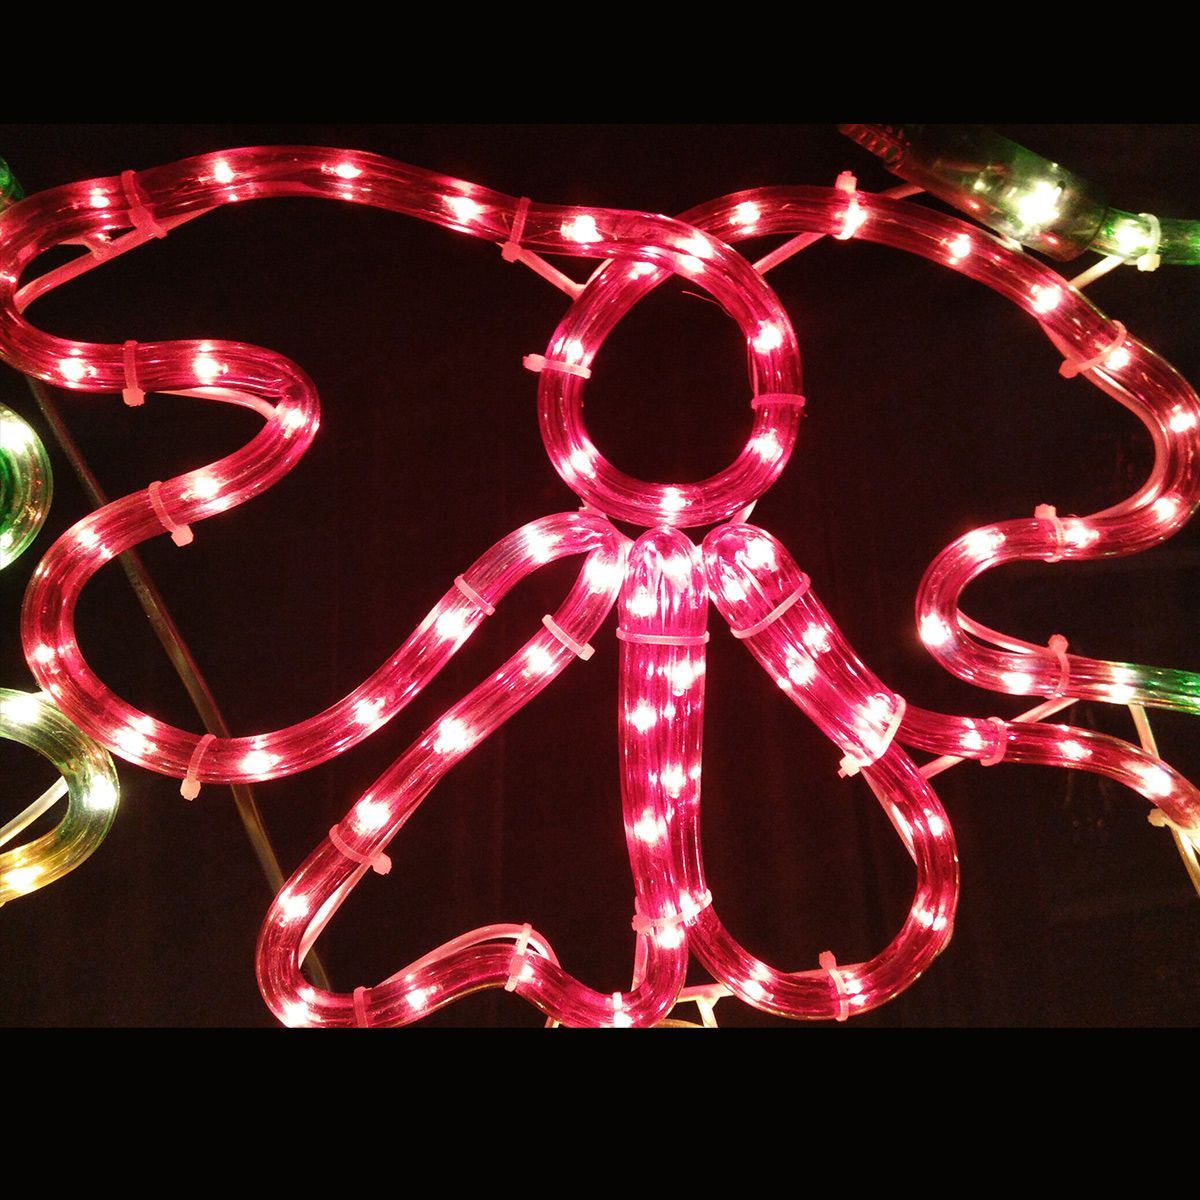 Christmas Bells with Bow Light Display | Buy Outdoor Christmas Decorations - 358834